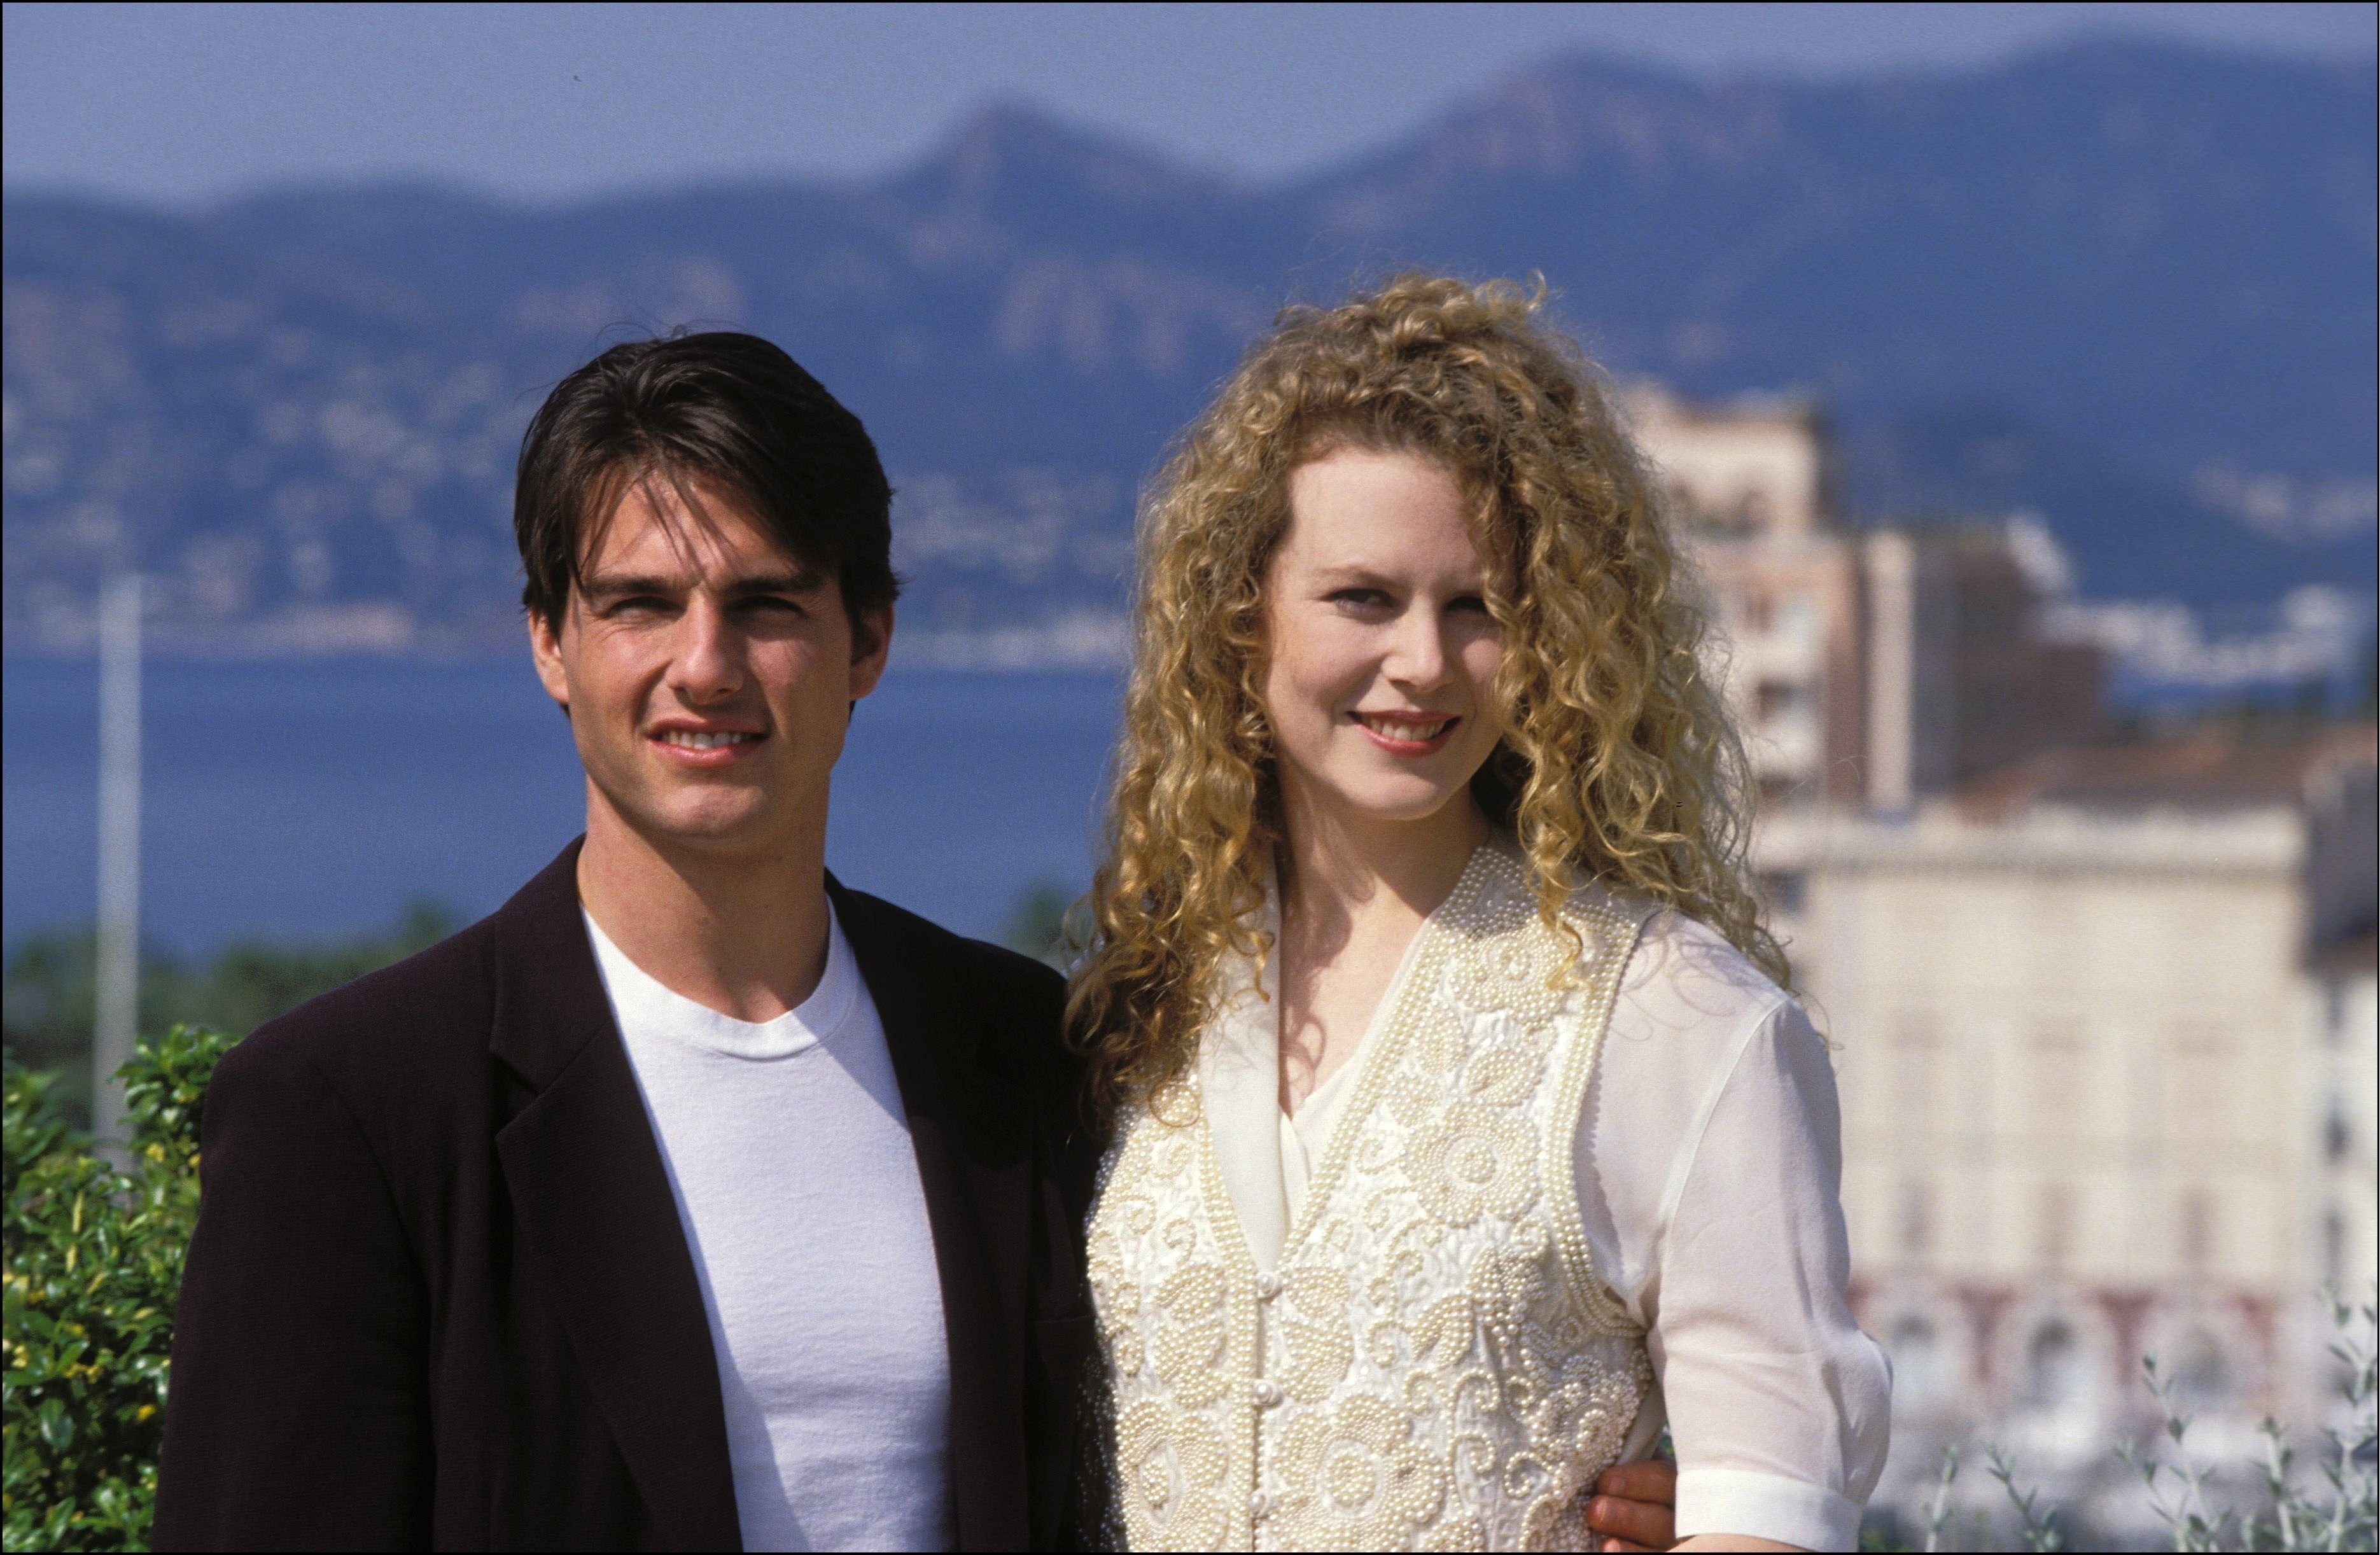 Tom Cruise and Nicole Kidman in Cannes, France. | Photo: Getty Images